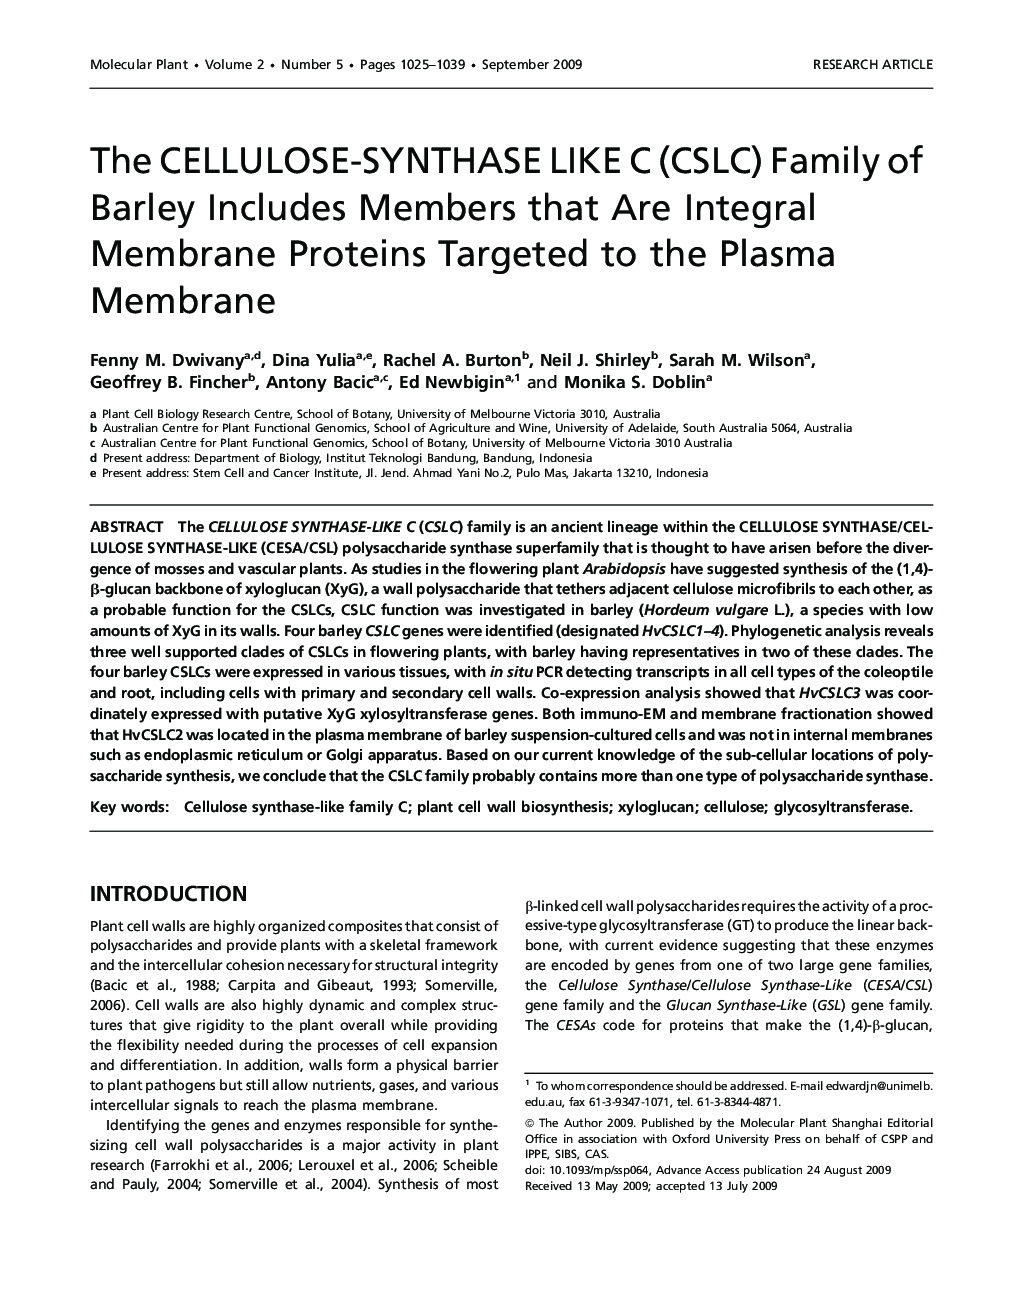 The CELLULOSE-SYNTHASE LIKE C (CSLC) Family of Barley Includes Members that Are Integral Membrane Proteins Targeted to the Plasma Membrane 